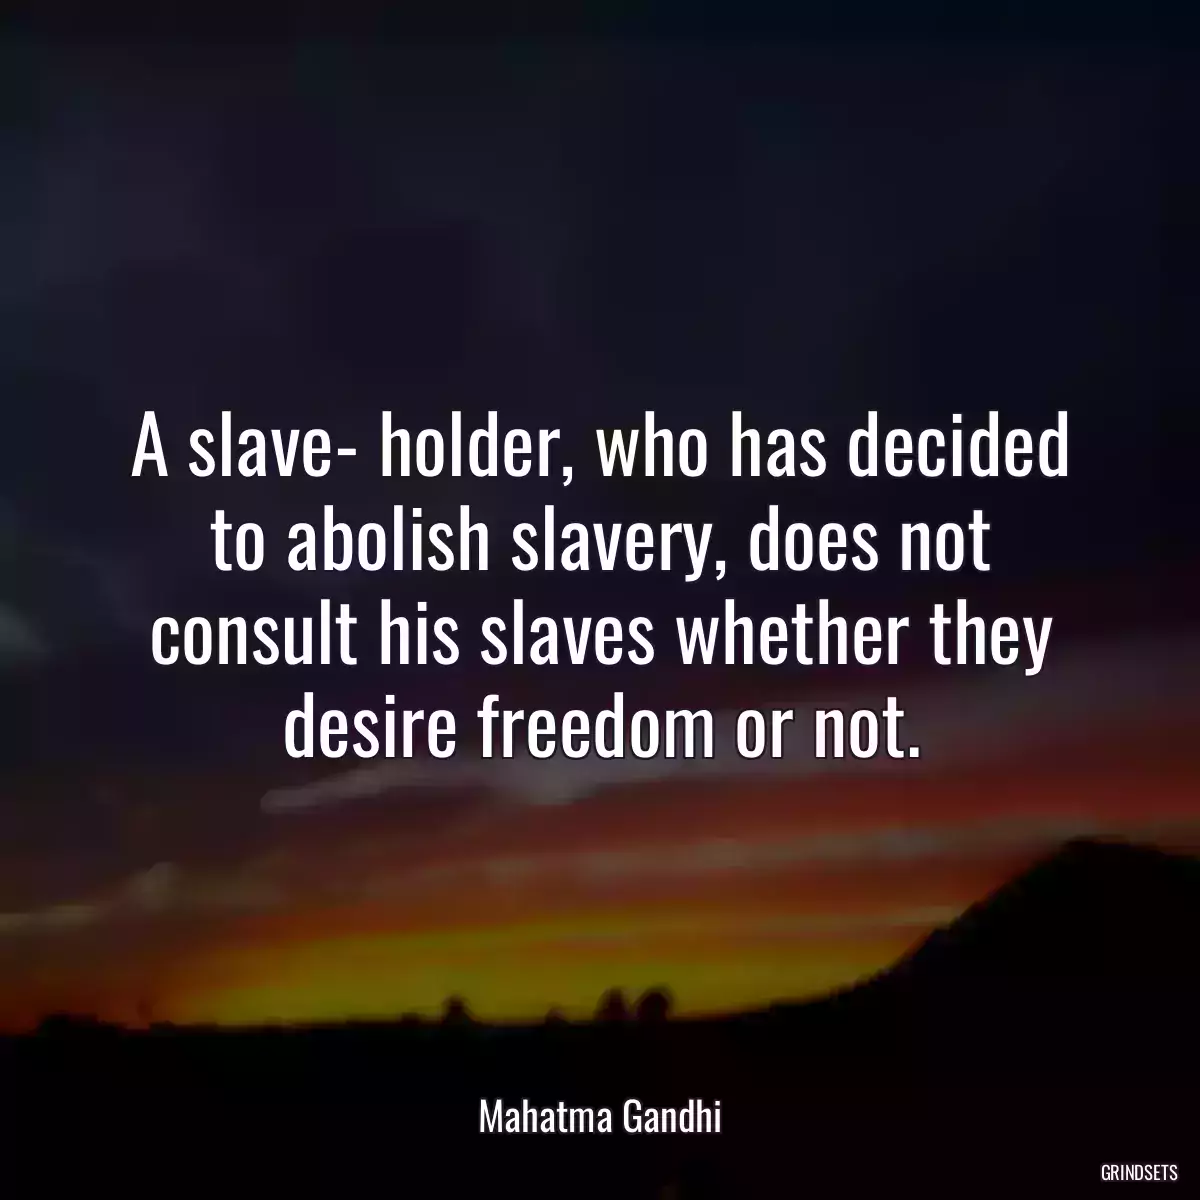 A slave- holder, who has decided to abolish slavery, does not consult his slaves whether they desire freedom or not.